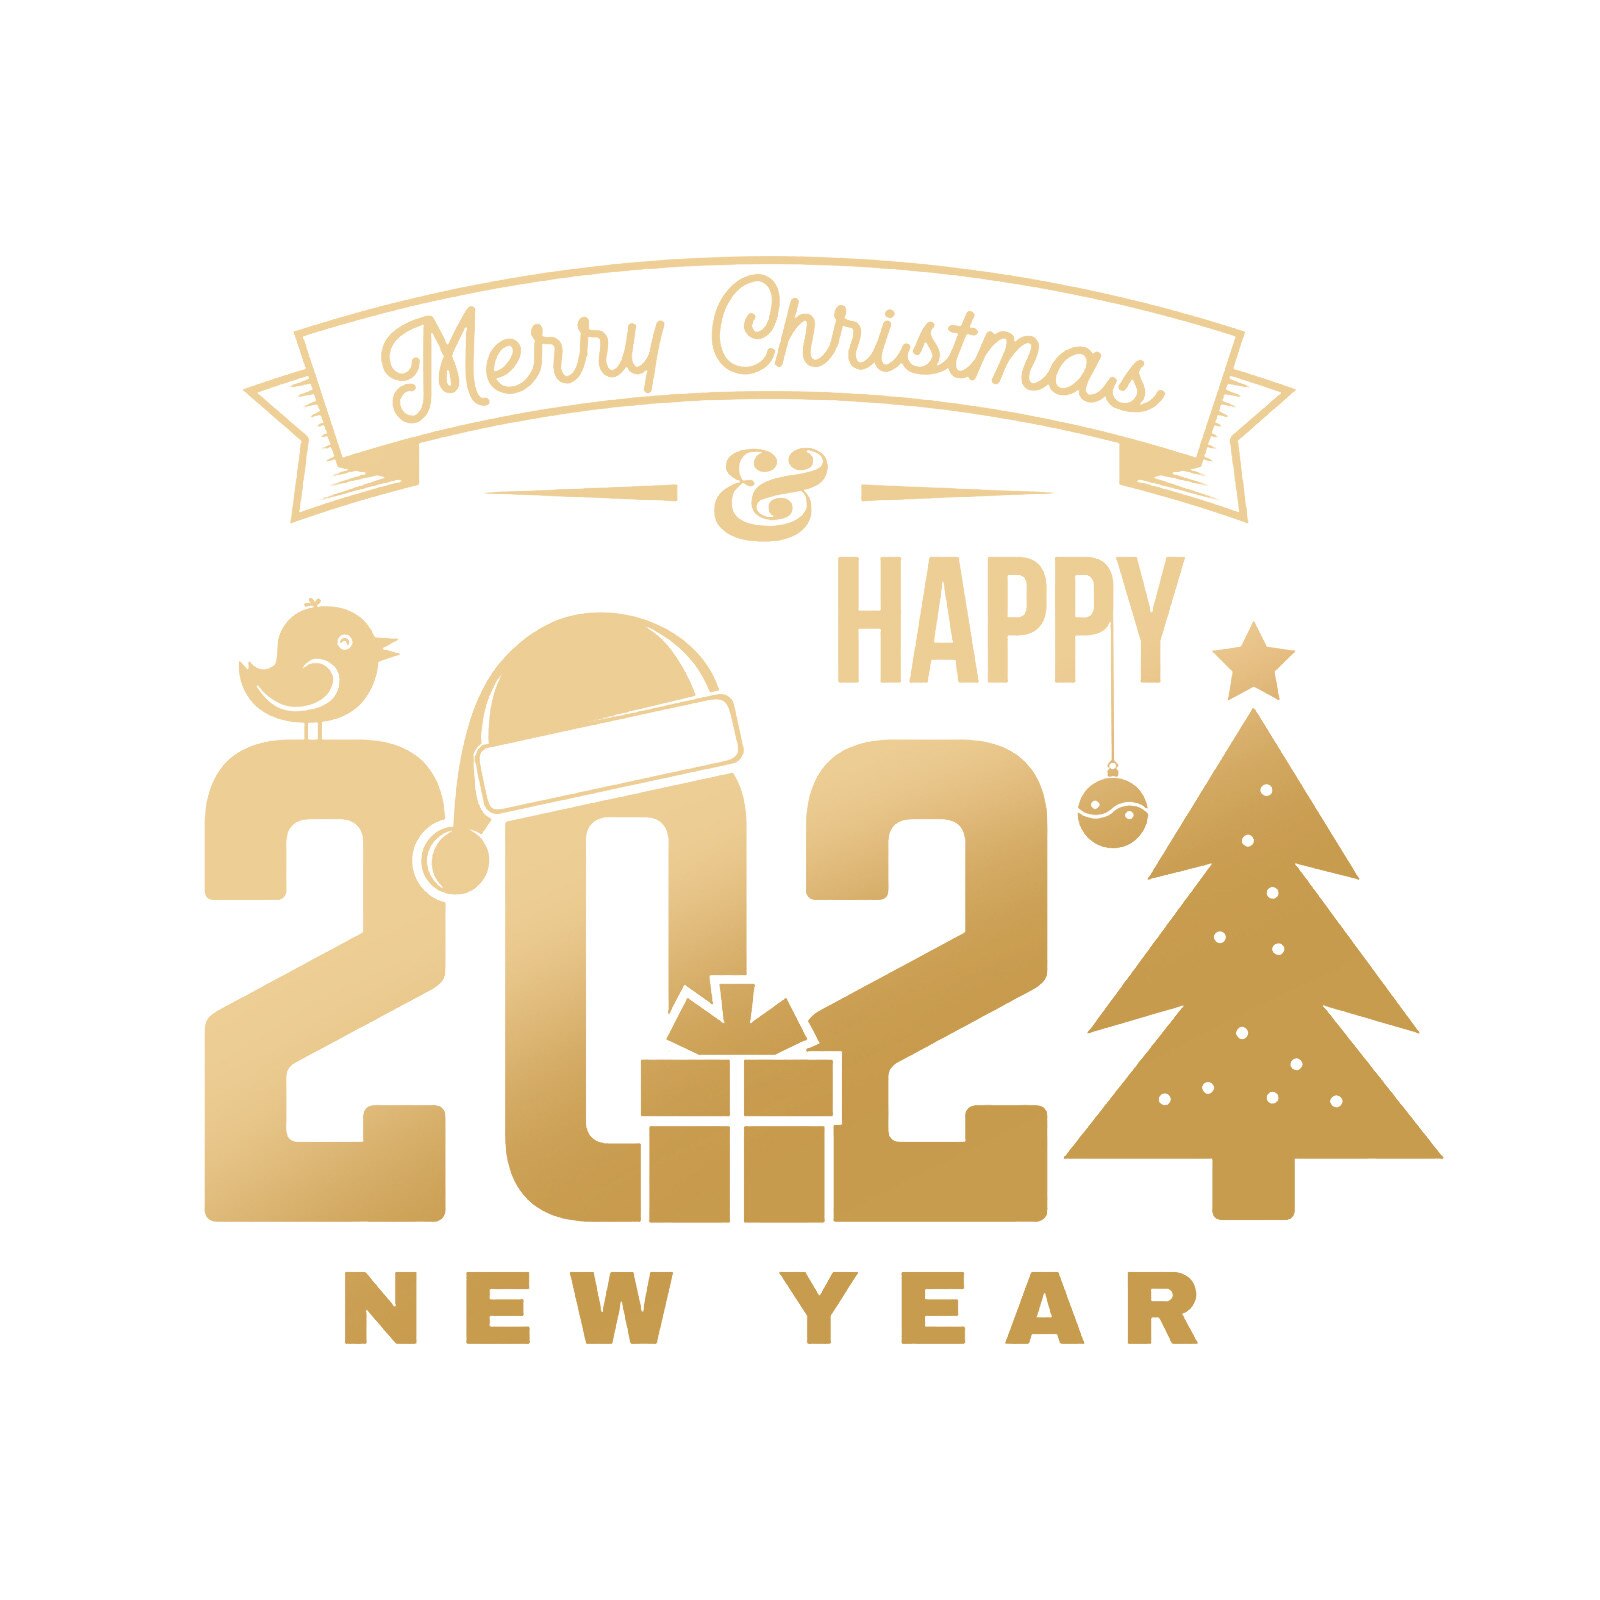 DIY Merry Christmas Wall Stickers Window Glass Stickers Christmas Decorations For Home Christmas Ornaments Xmas Year: Gold